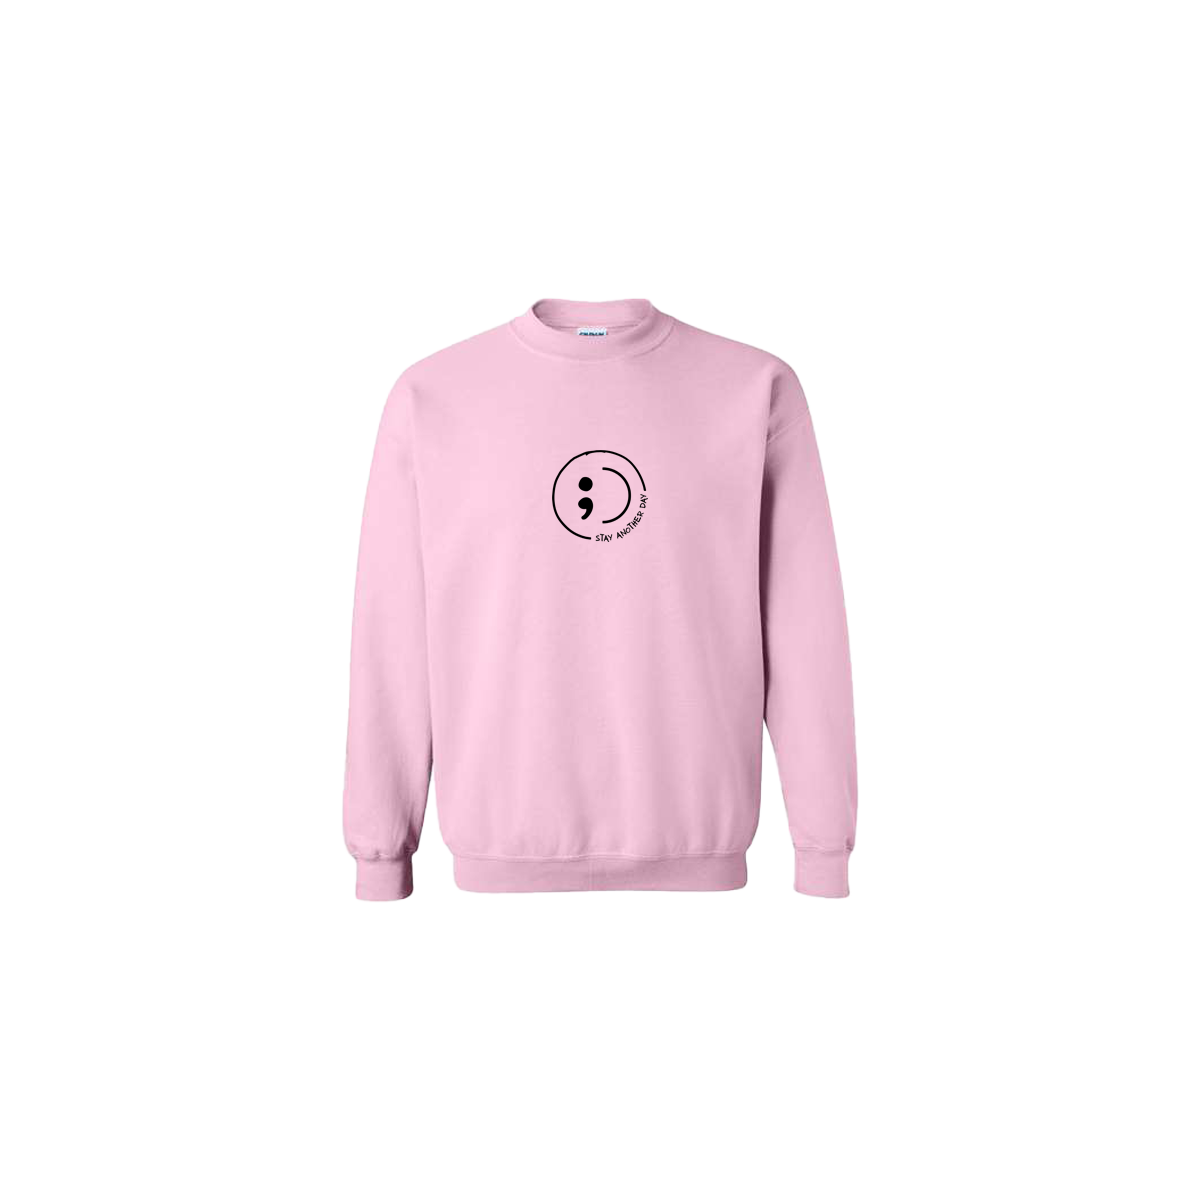 Stay Another Day Smiley with text Embroidered Light Pink Crewneck - Mental Health Awareness Clothing